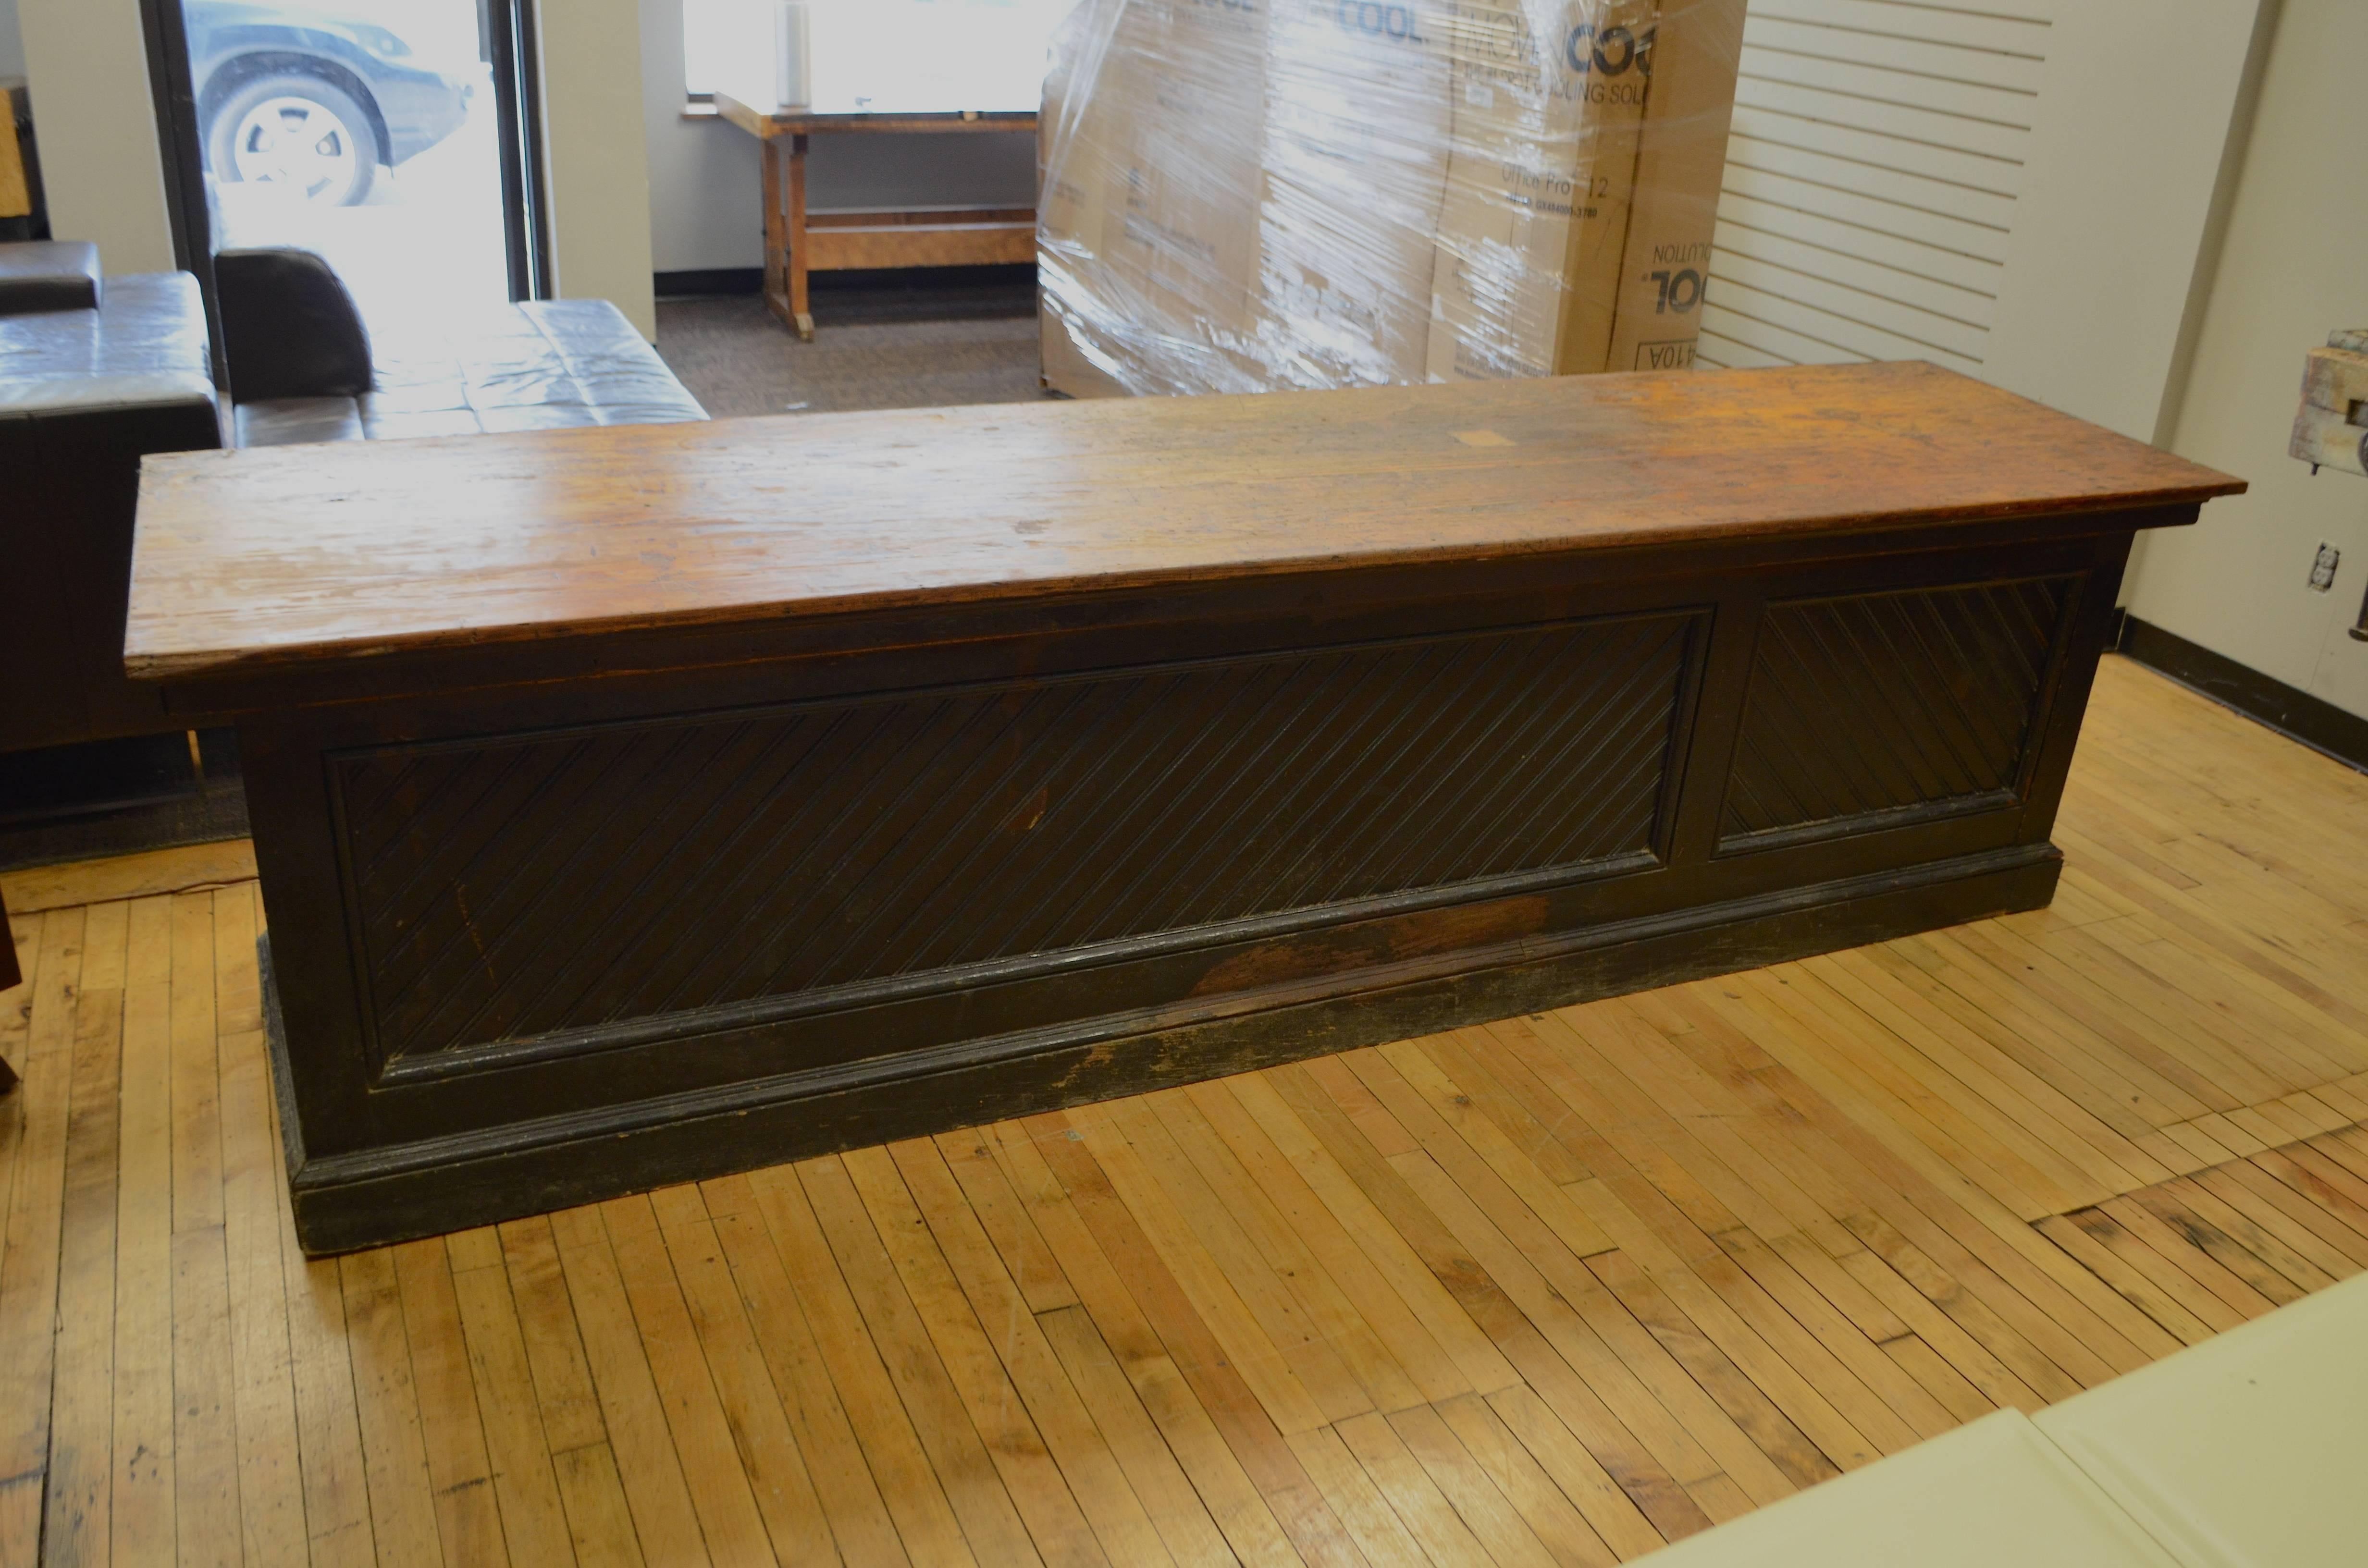 Hardware store counter bar from the late 1800s. Extraordinary piece with historical resonance from the Upper Midwest. Eighteen bins/cubbies on the reverse side held the nails, screws ands bolts that passed across this counter into the hands of the